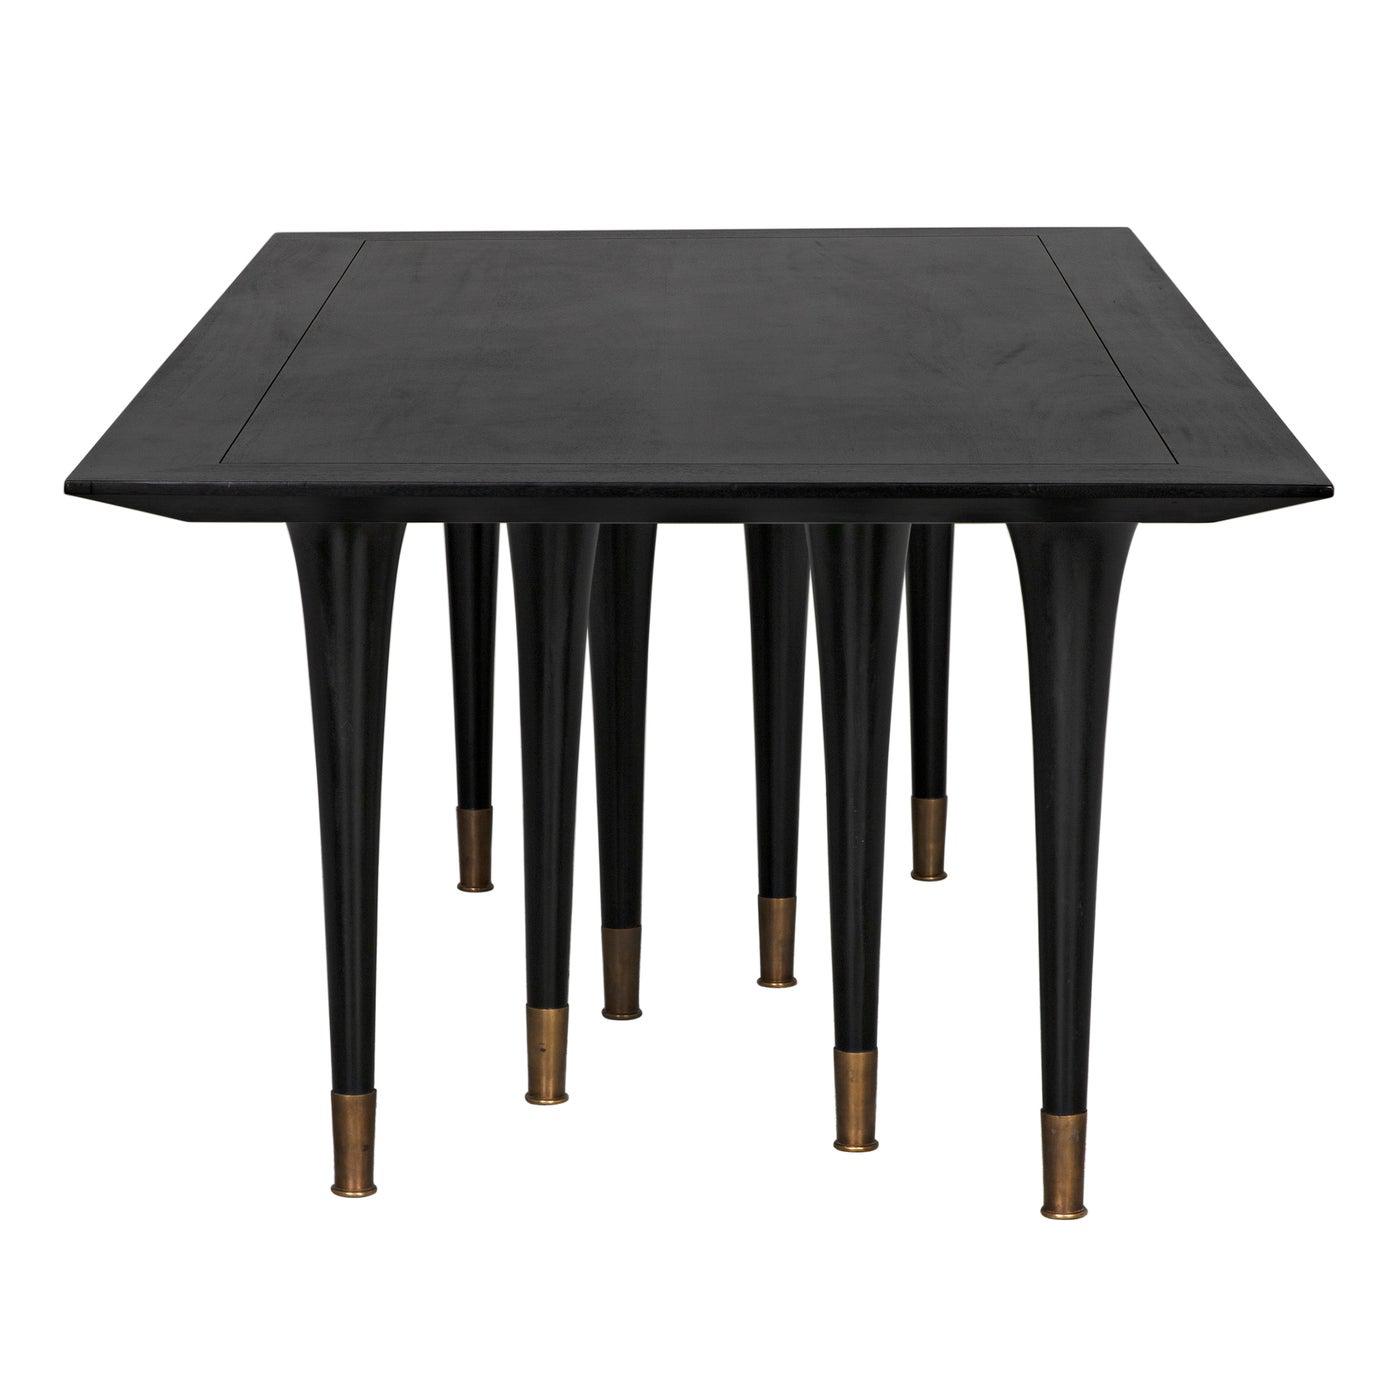 Romeo Dining Table, Hand Rubbed Black